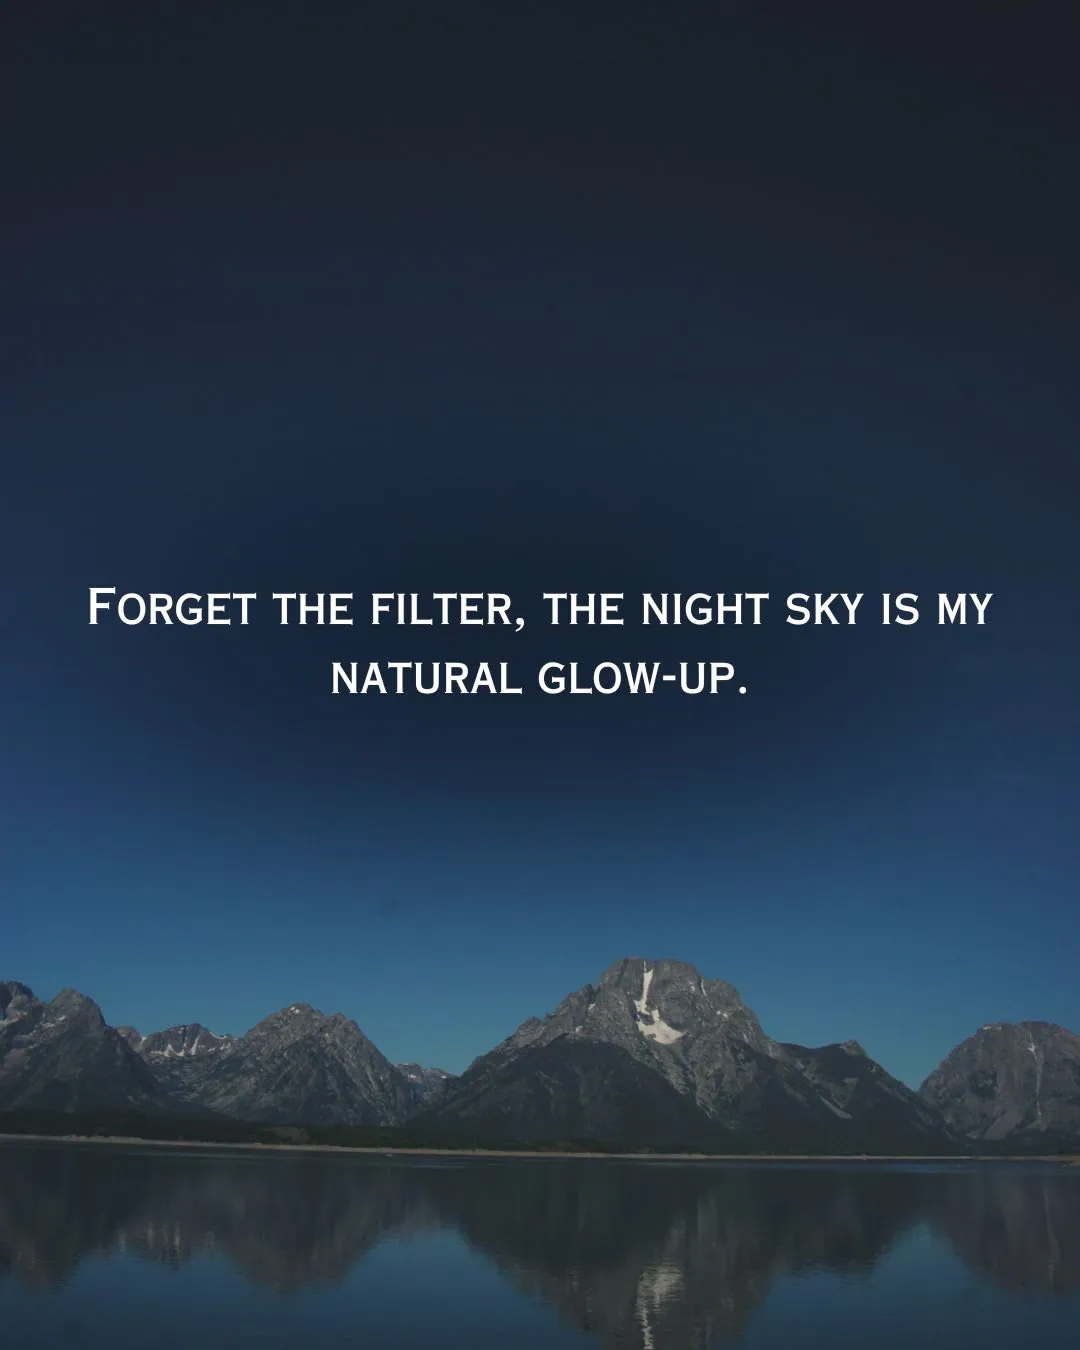 Night Sky Quotes for Instagram for Girl With Image 5